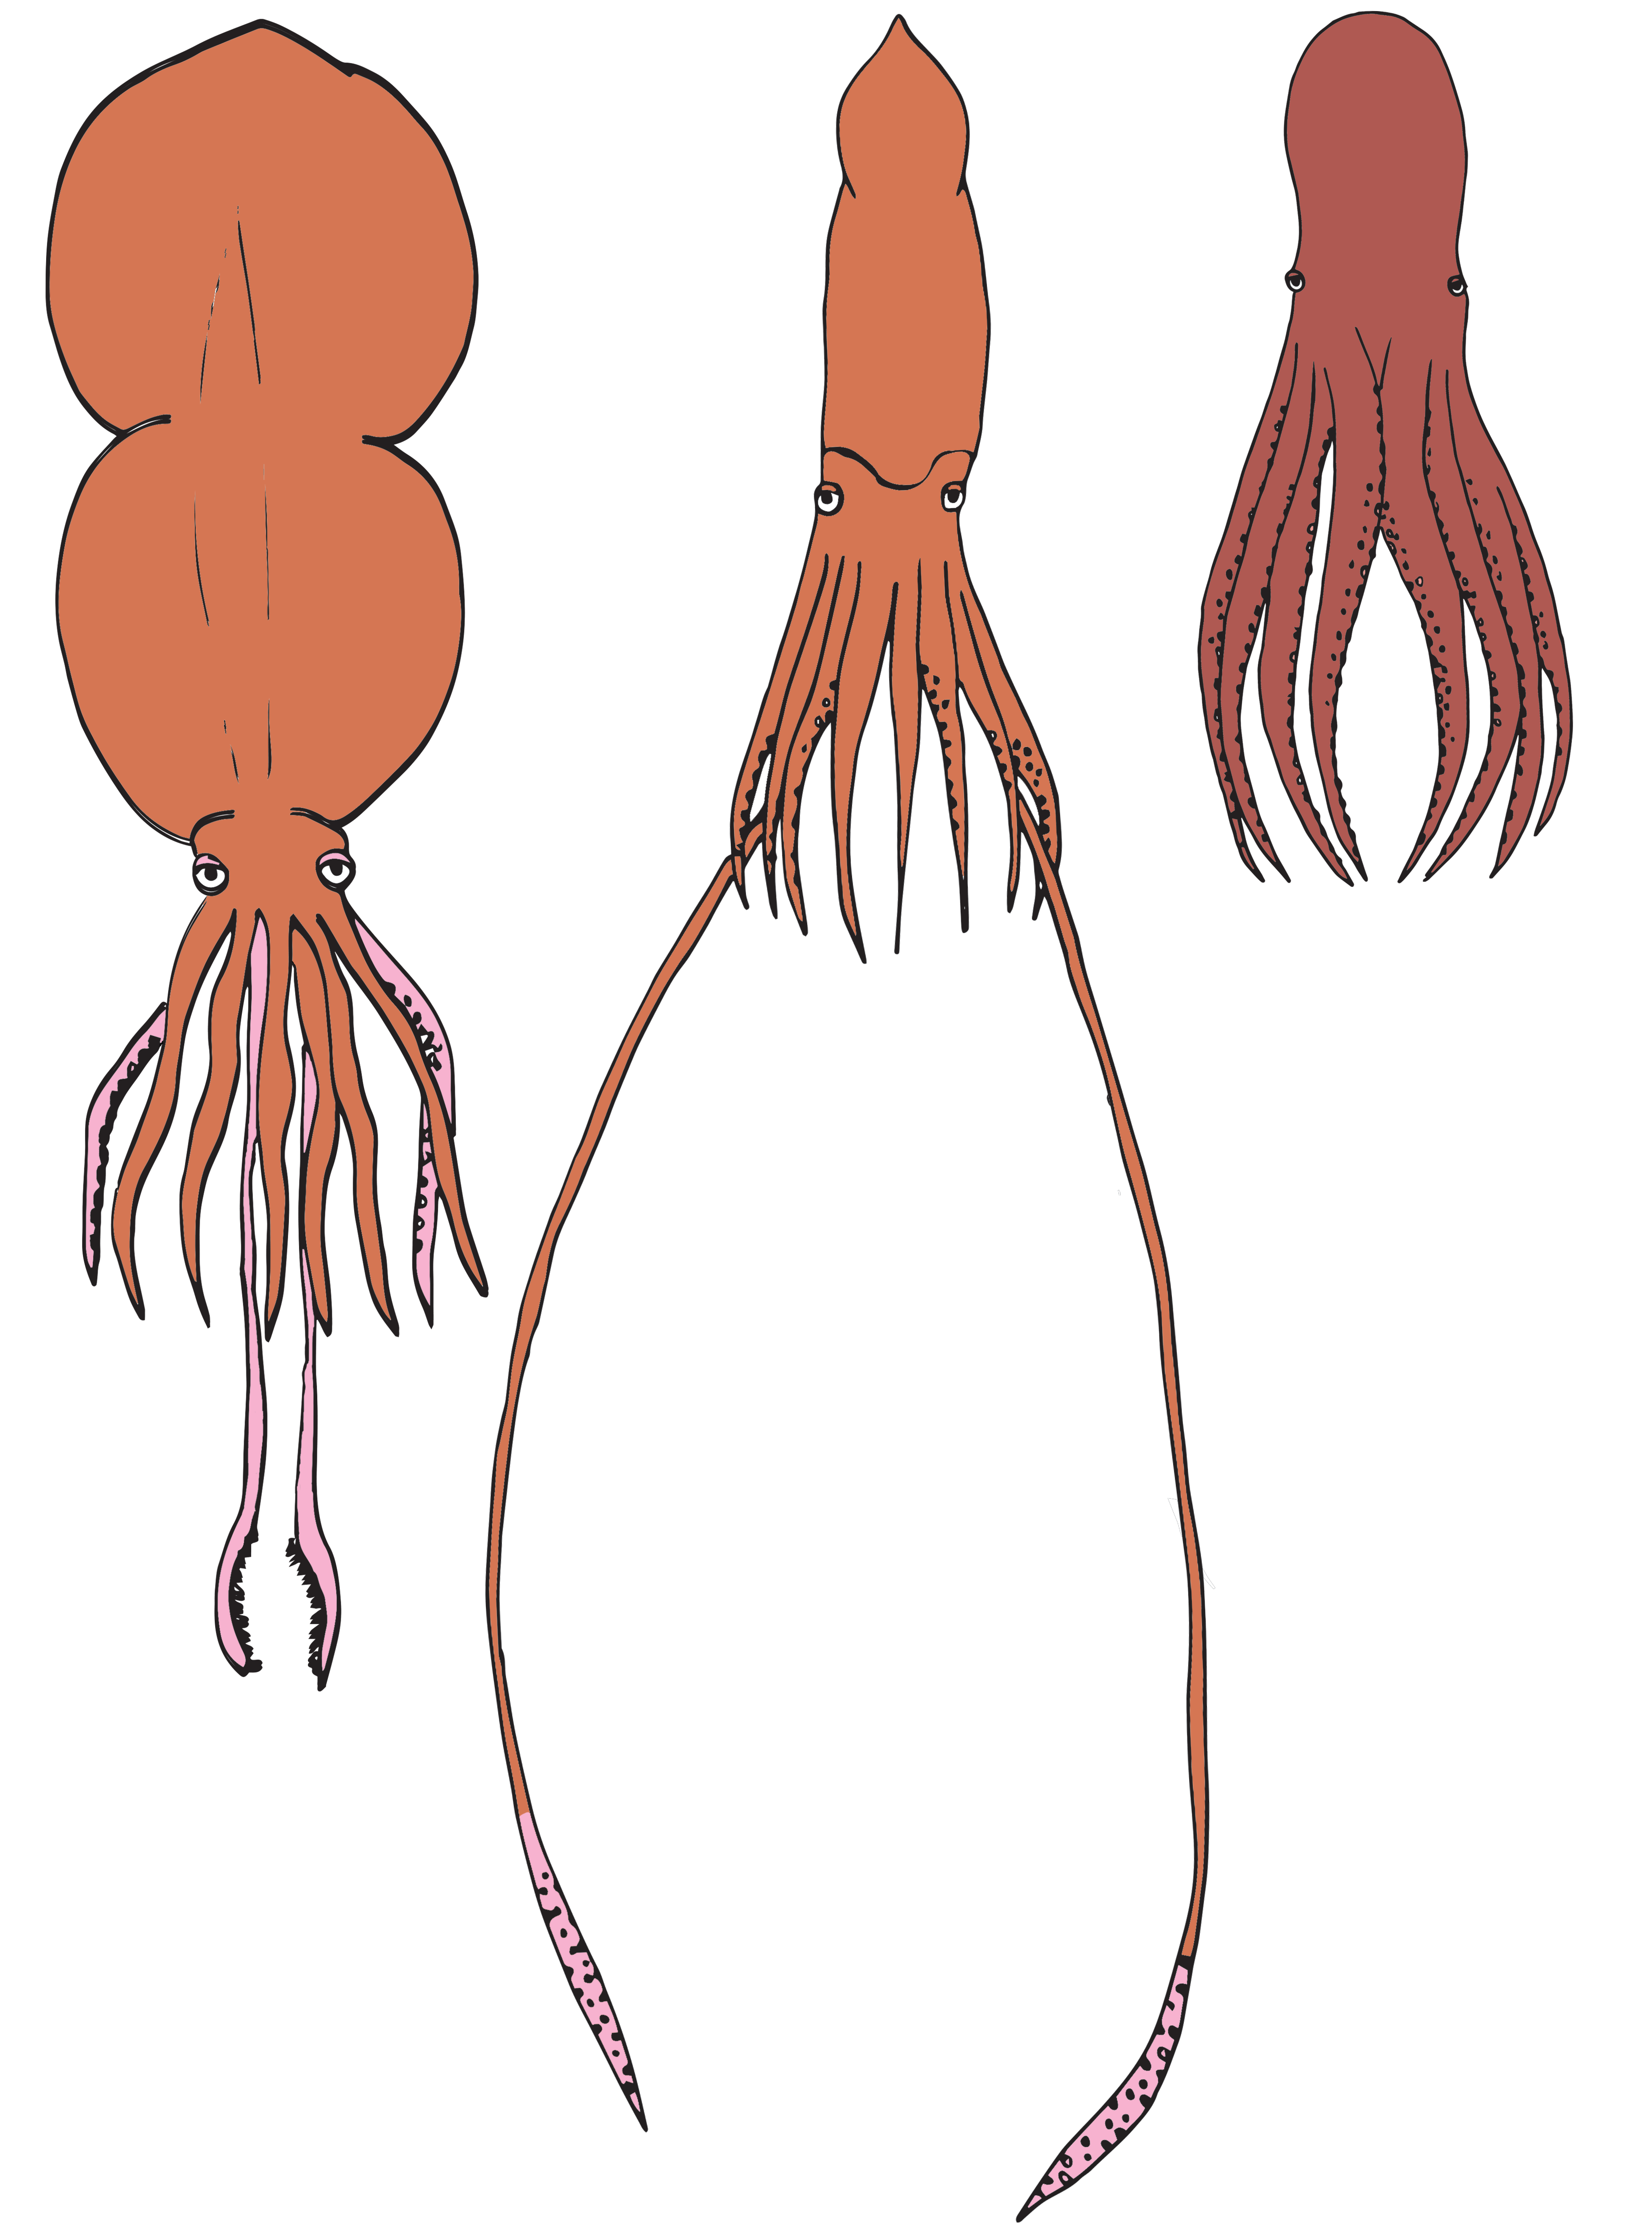 Drawings of a colossal squid, giant squid, and giant Pacific octopus